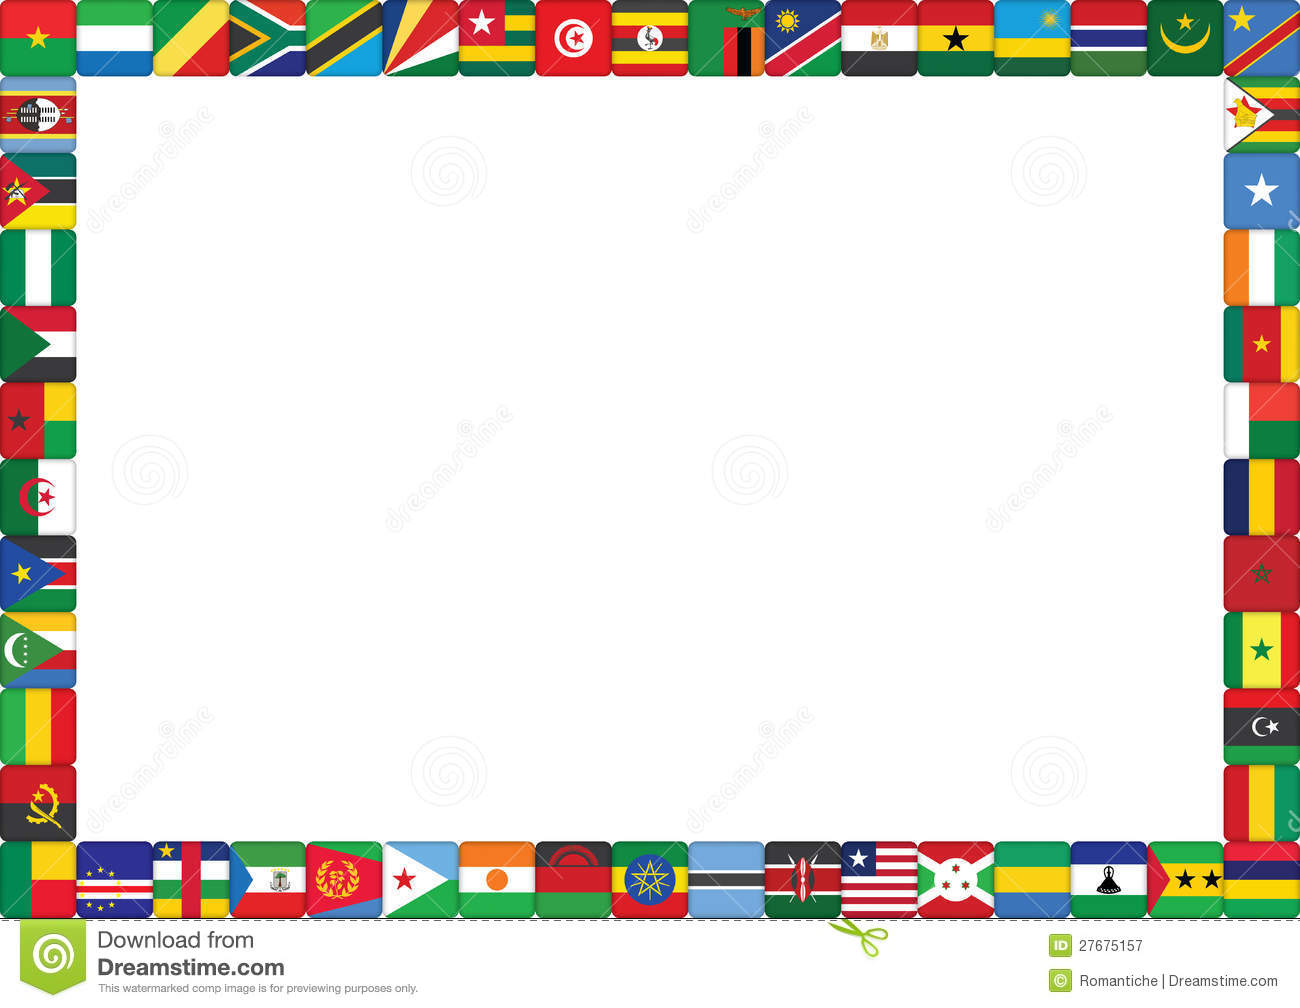 African Countries Flags Royalty Free Stock Photography   Image